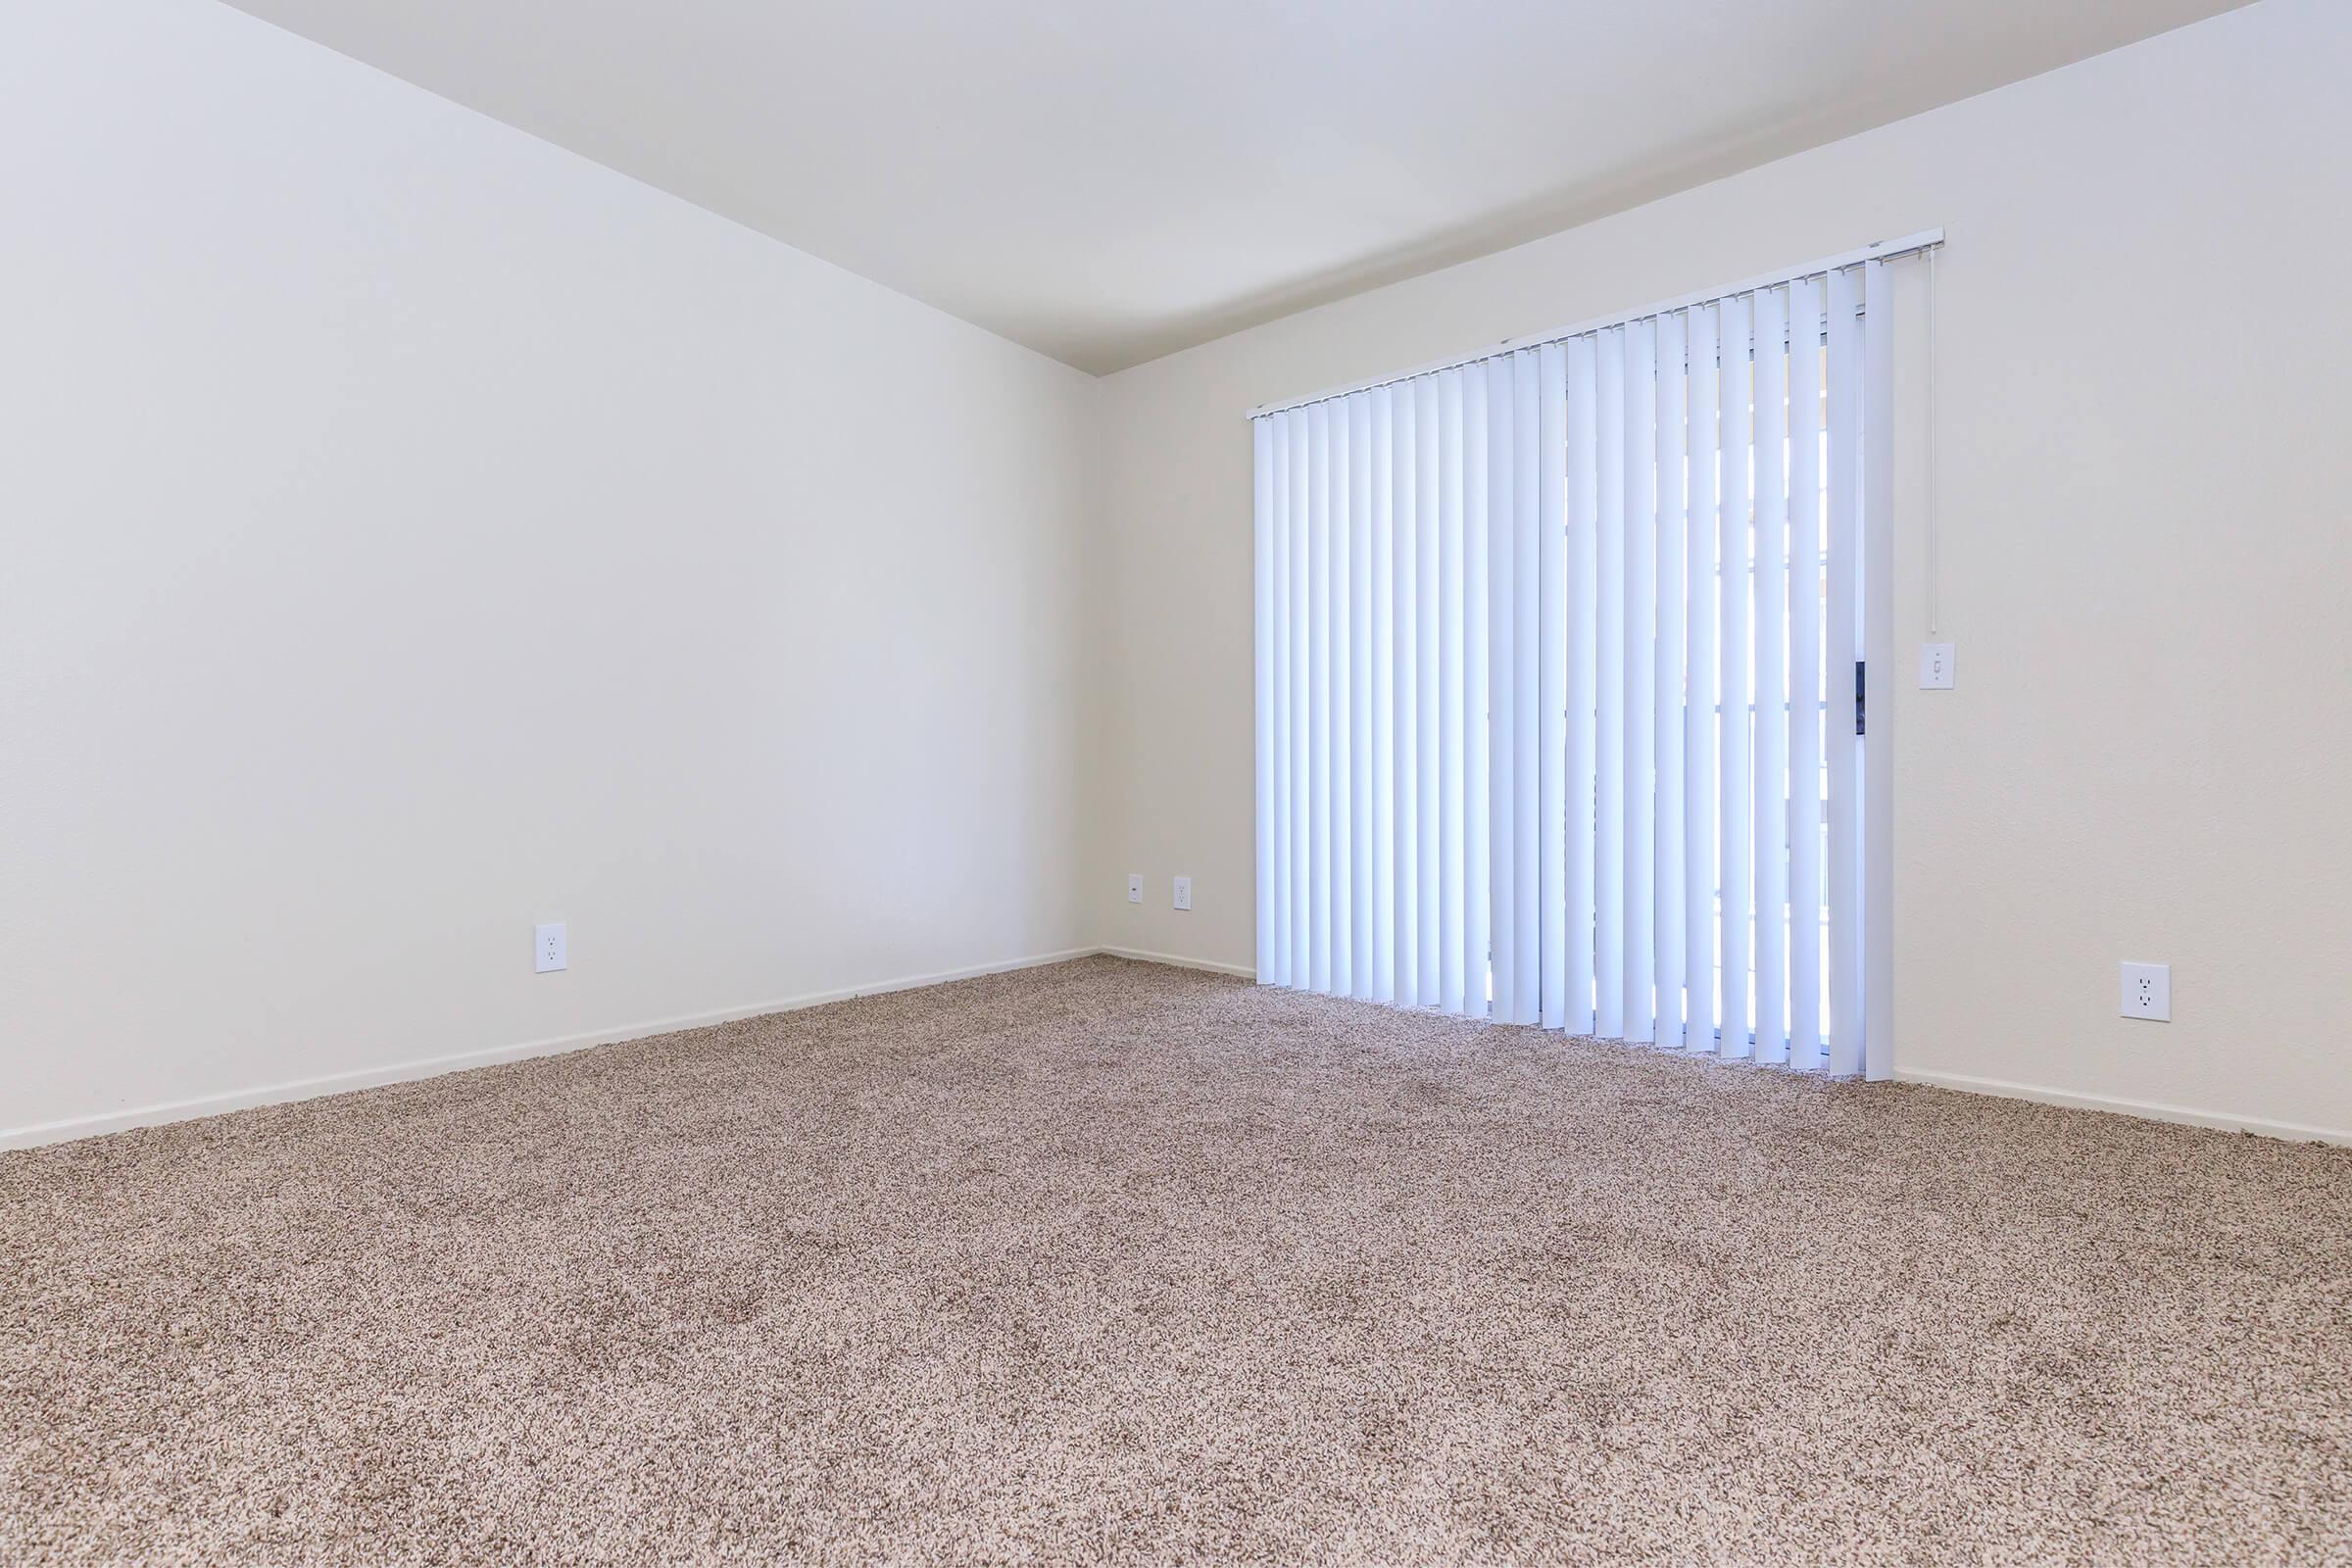 Vacant living room with closed window blinds